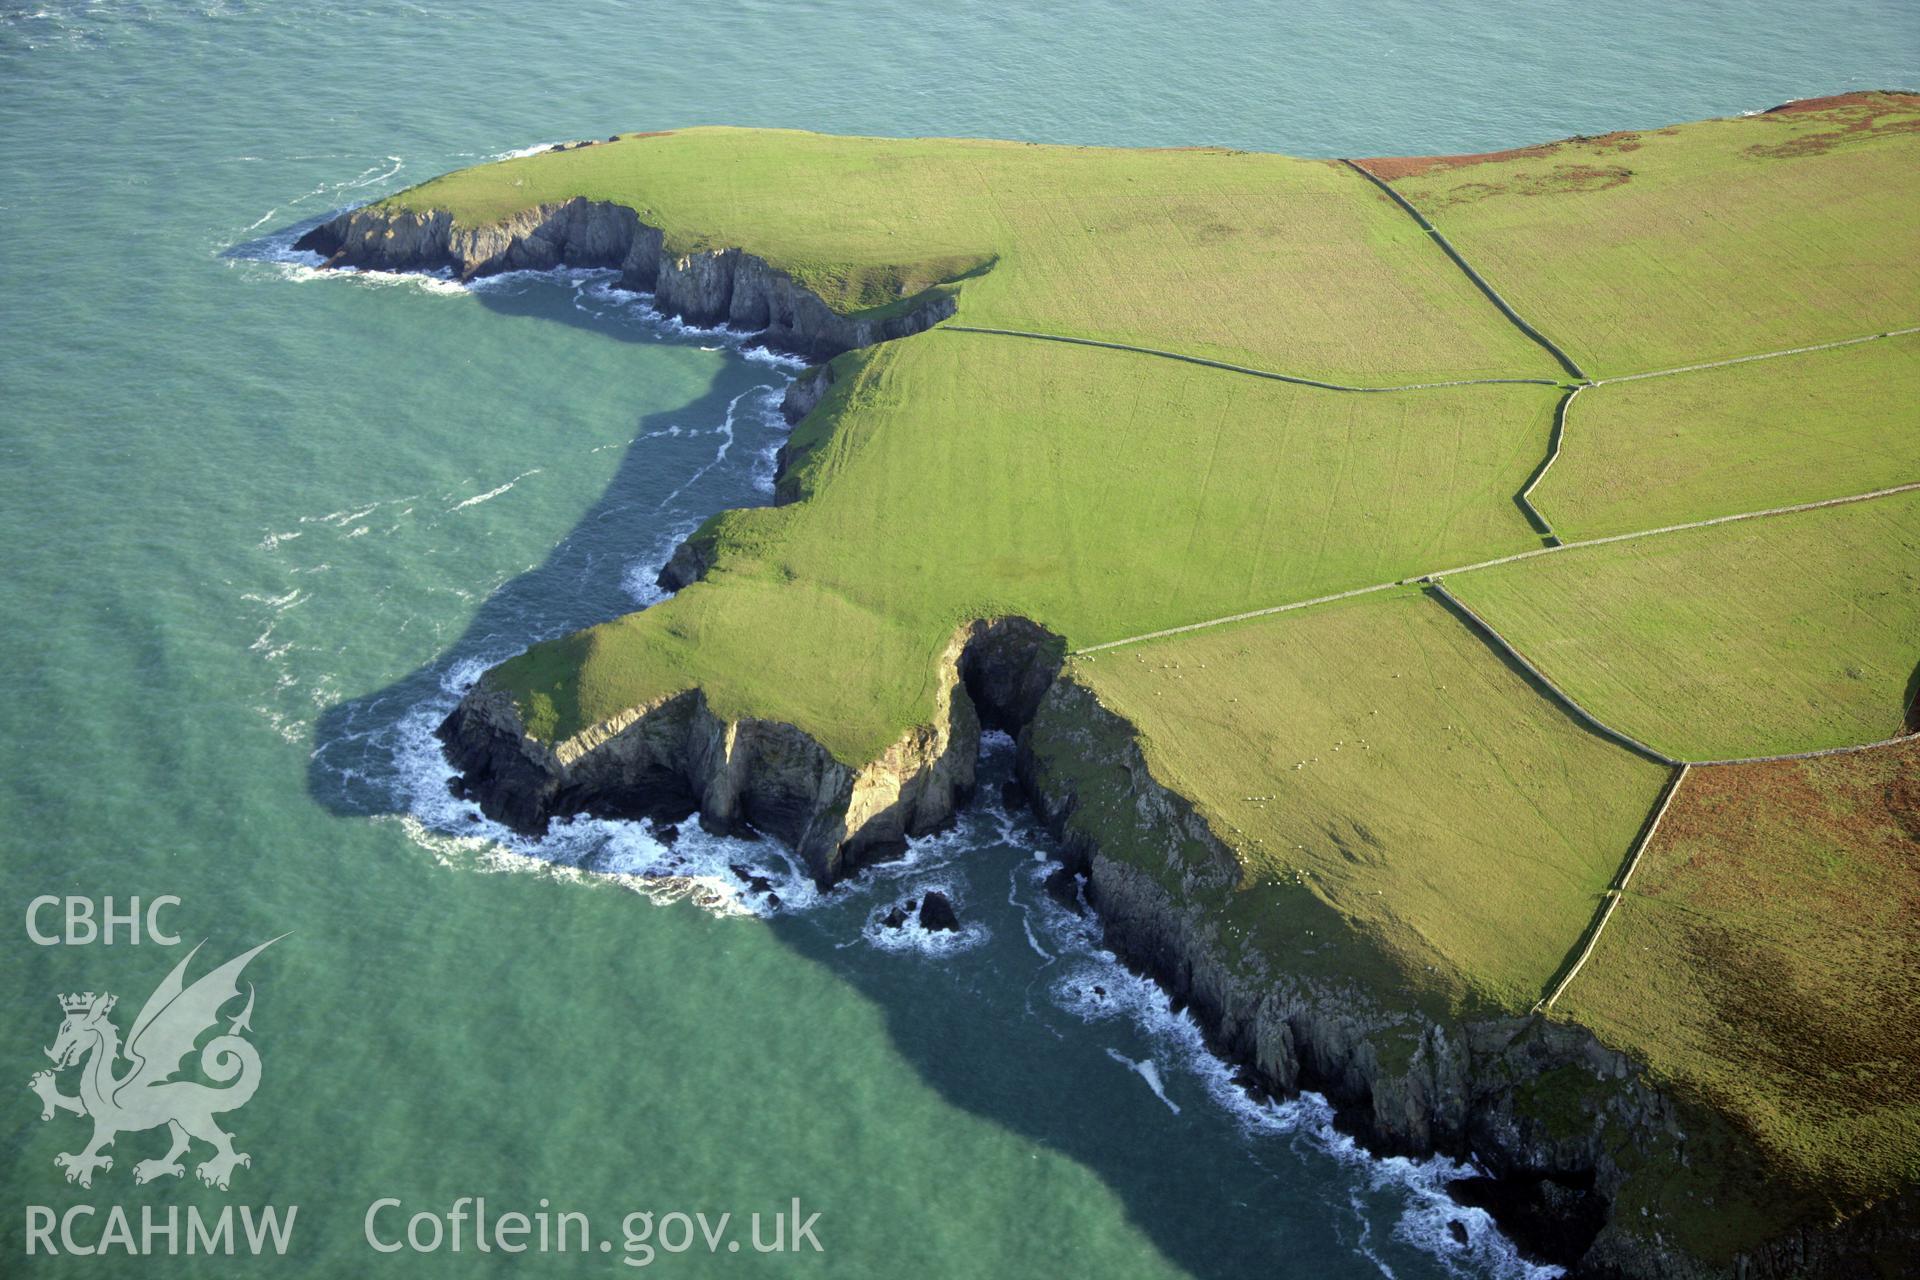 RCAHMW colour oblique photograph of Trwyn Ogog Hen cultivation features and Trwyn Sion-Owen relict field system, Ramsey Island. Taken by O. Davies & T. Driver on 22/11/2013.